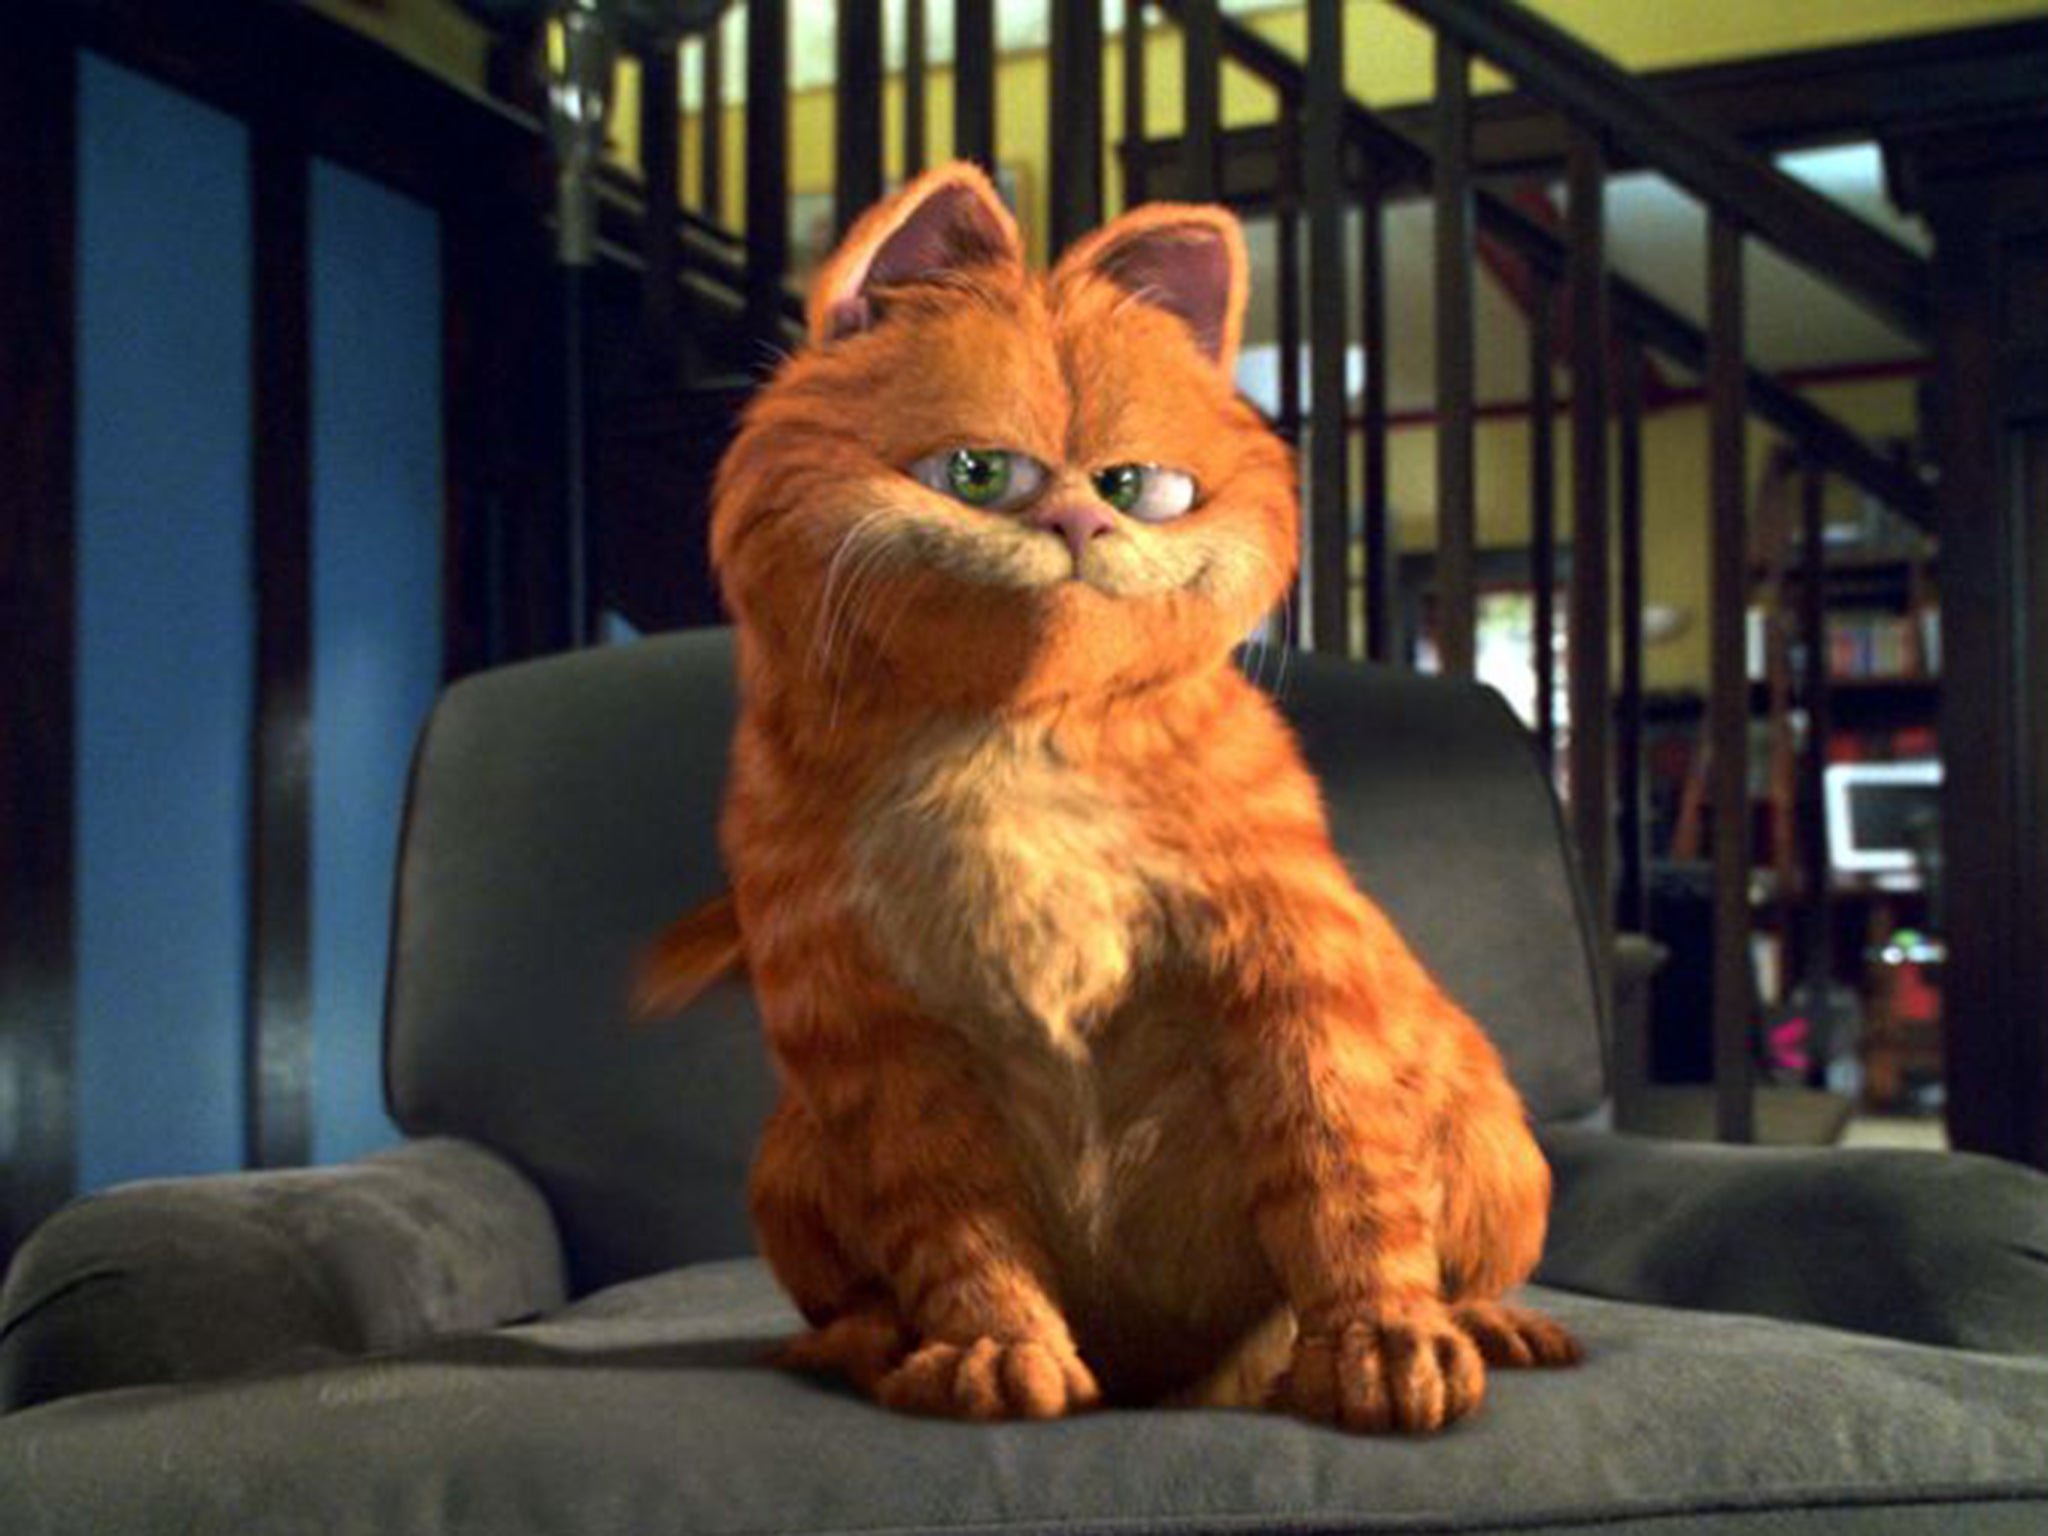 Real animals appearing in films could lose out to CGI creations such as Garfield the cat